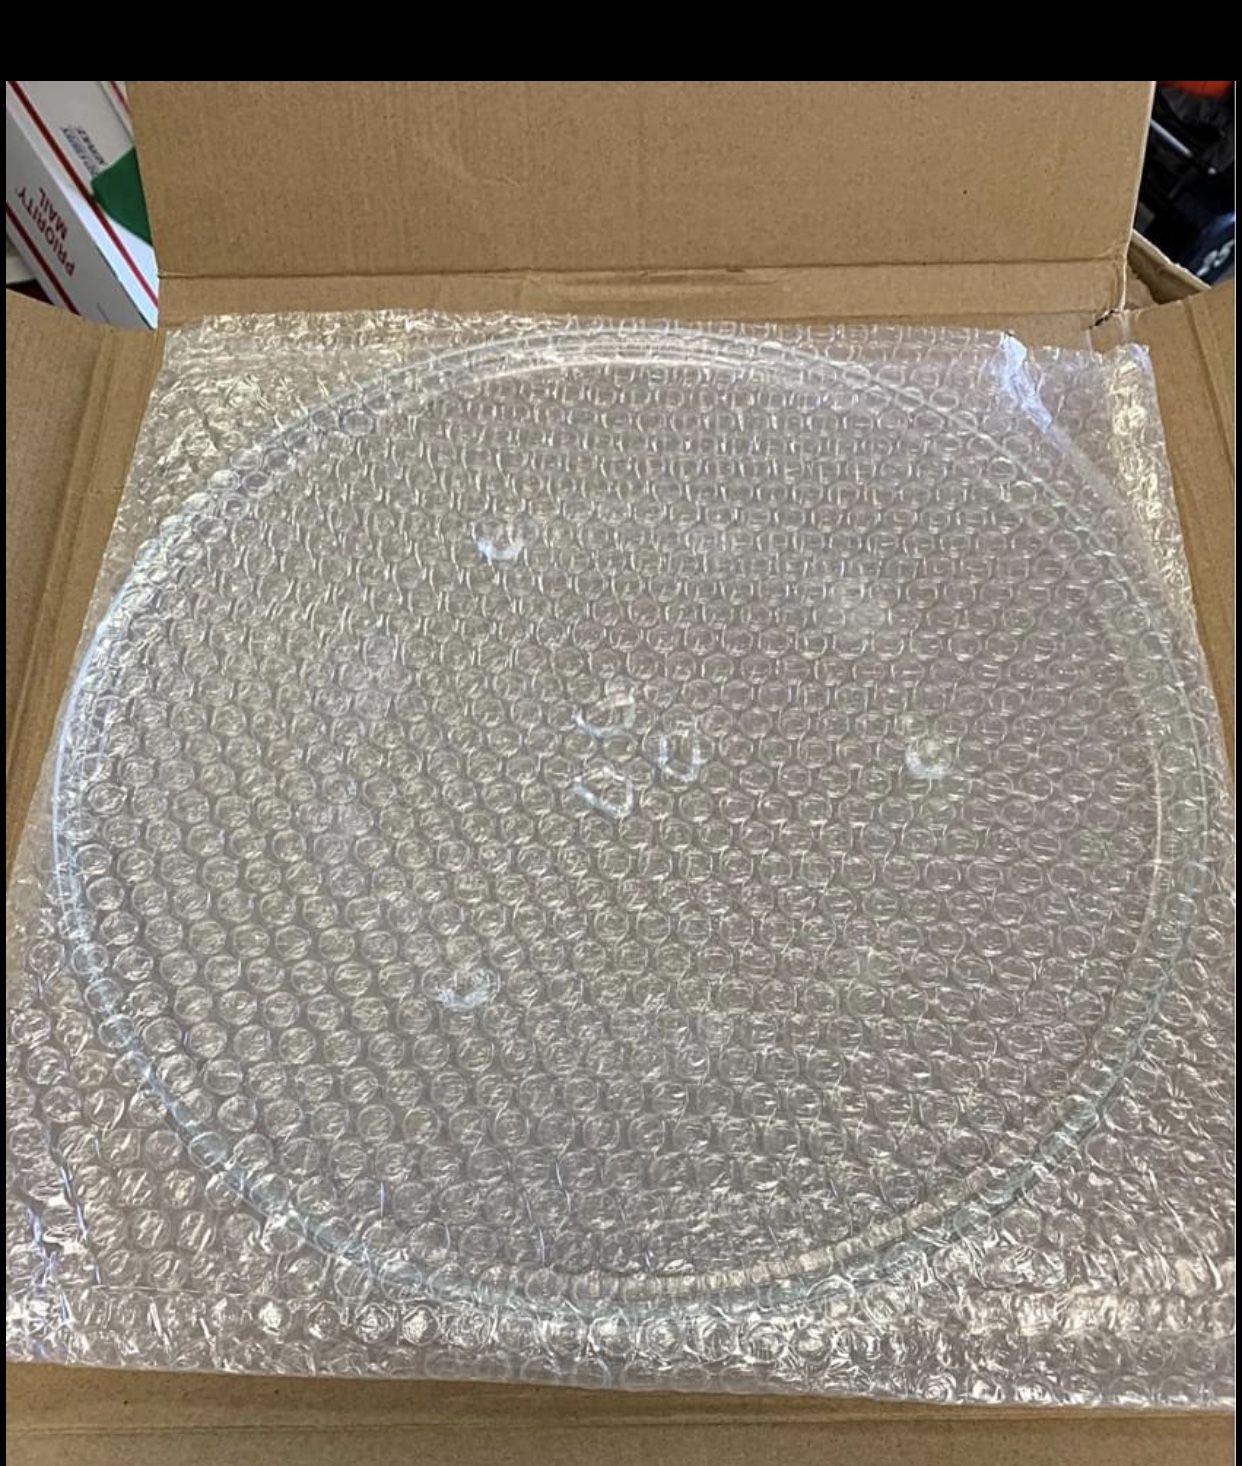 Microwave replacement plate